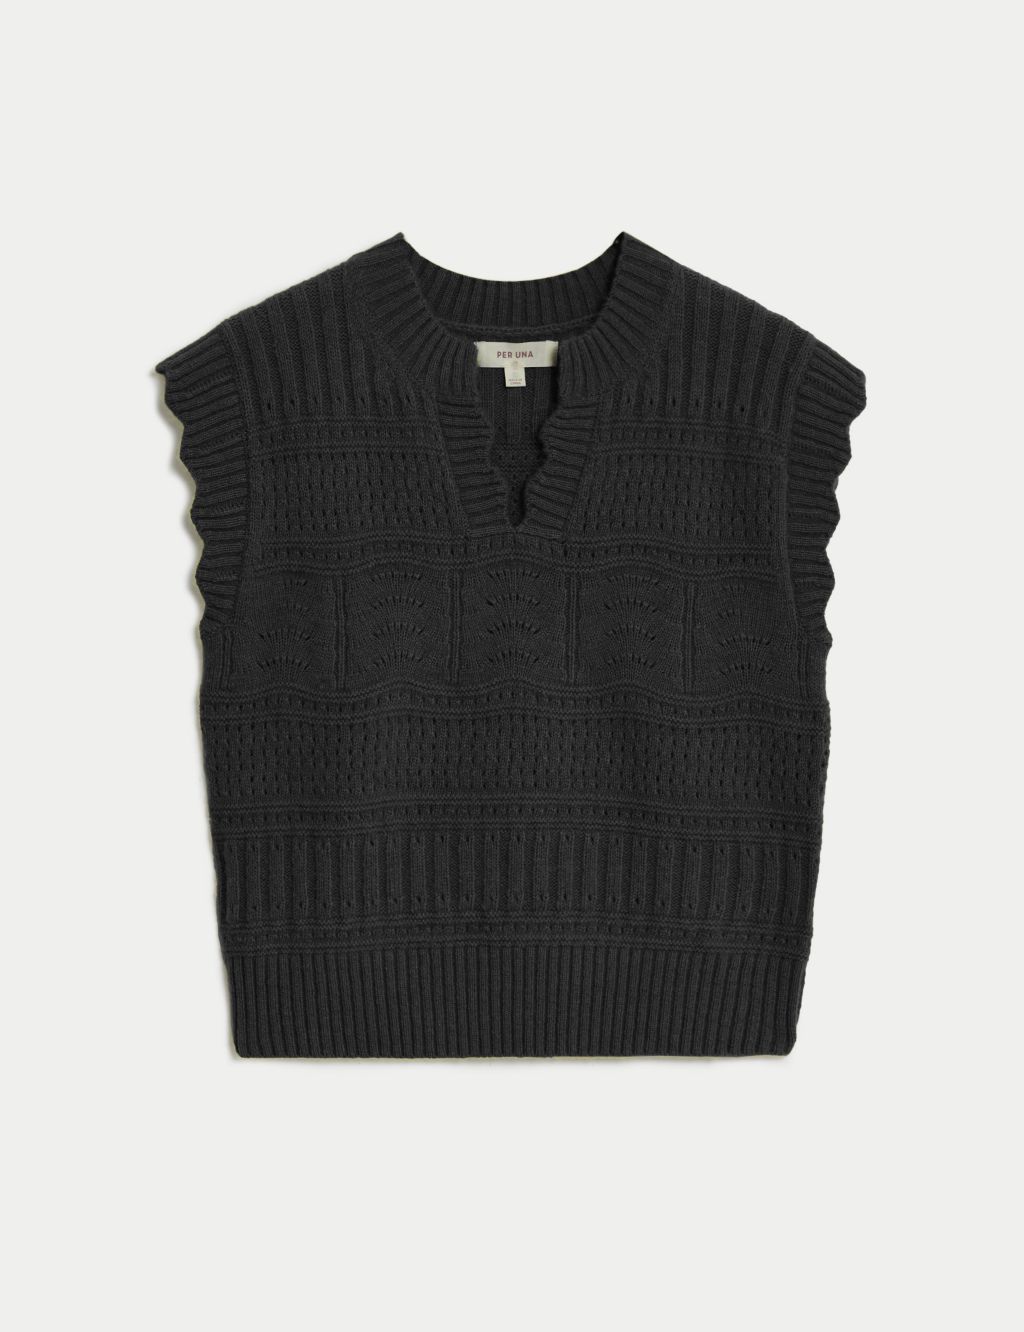 Notch Neck Knitted Vest with Wool image 2